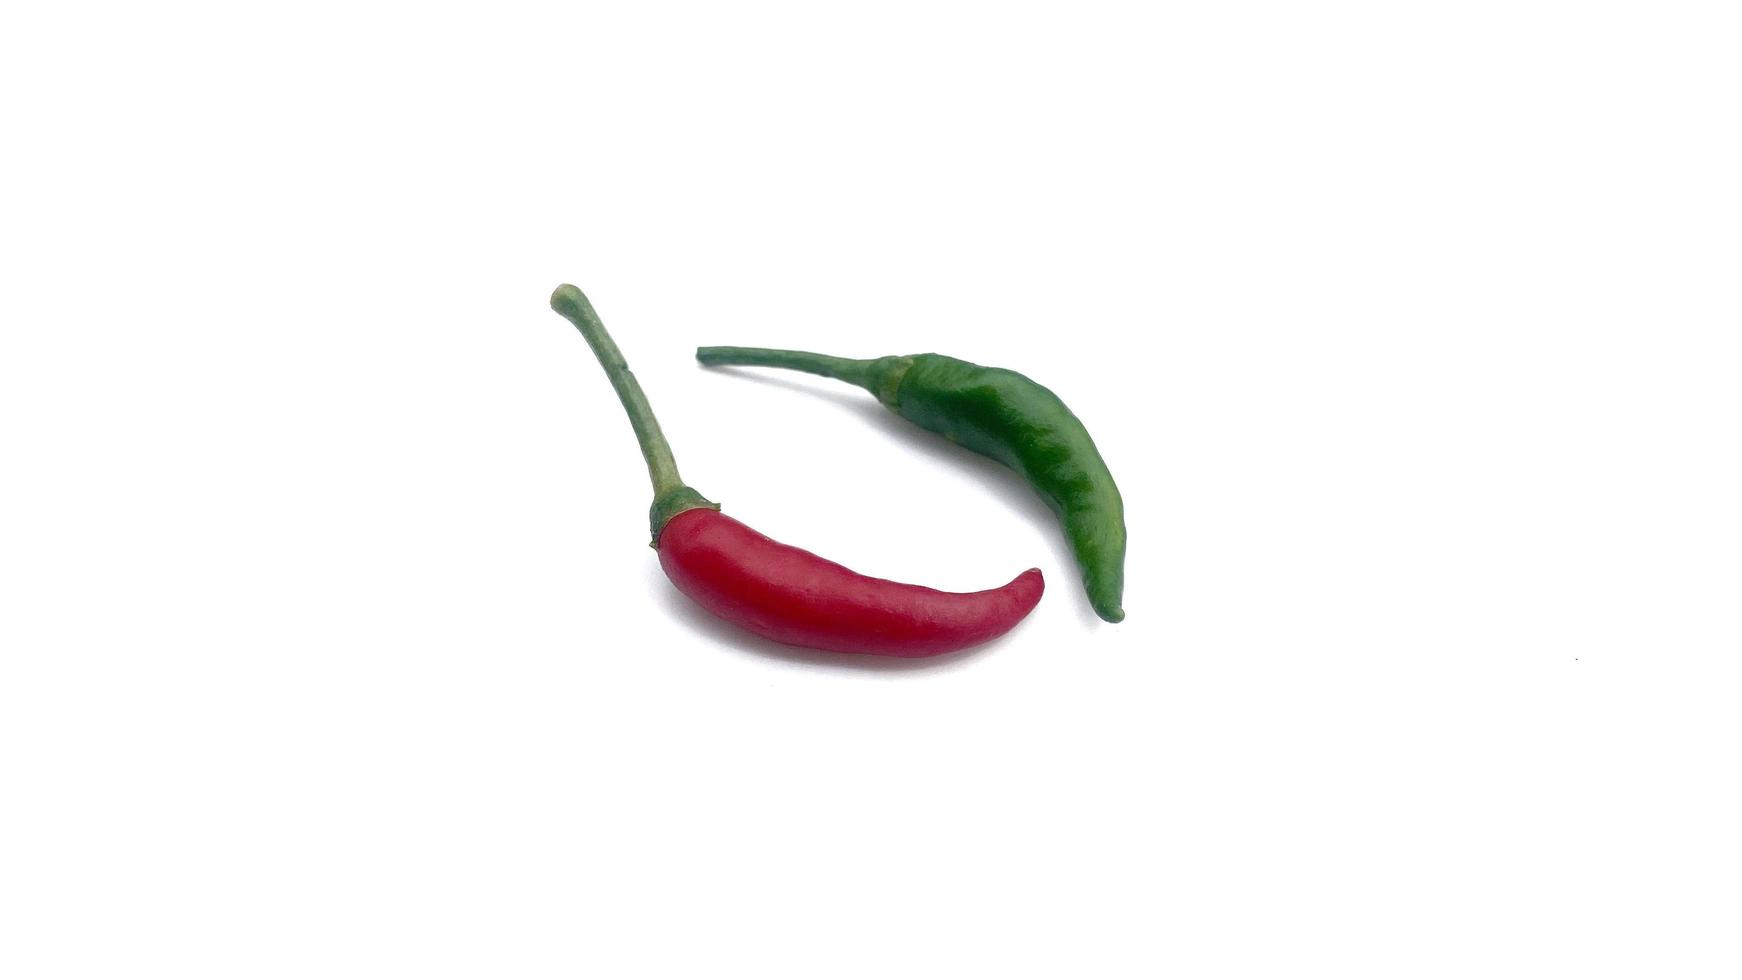 Fresh red and green chili peppers placed on a white background, great for editing and advertising spicy foods. photo